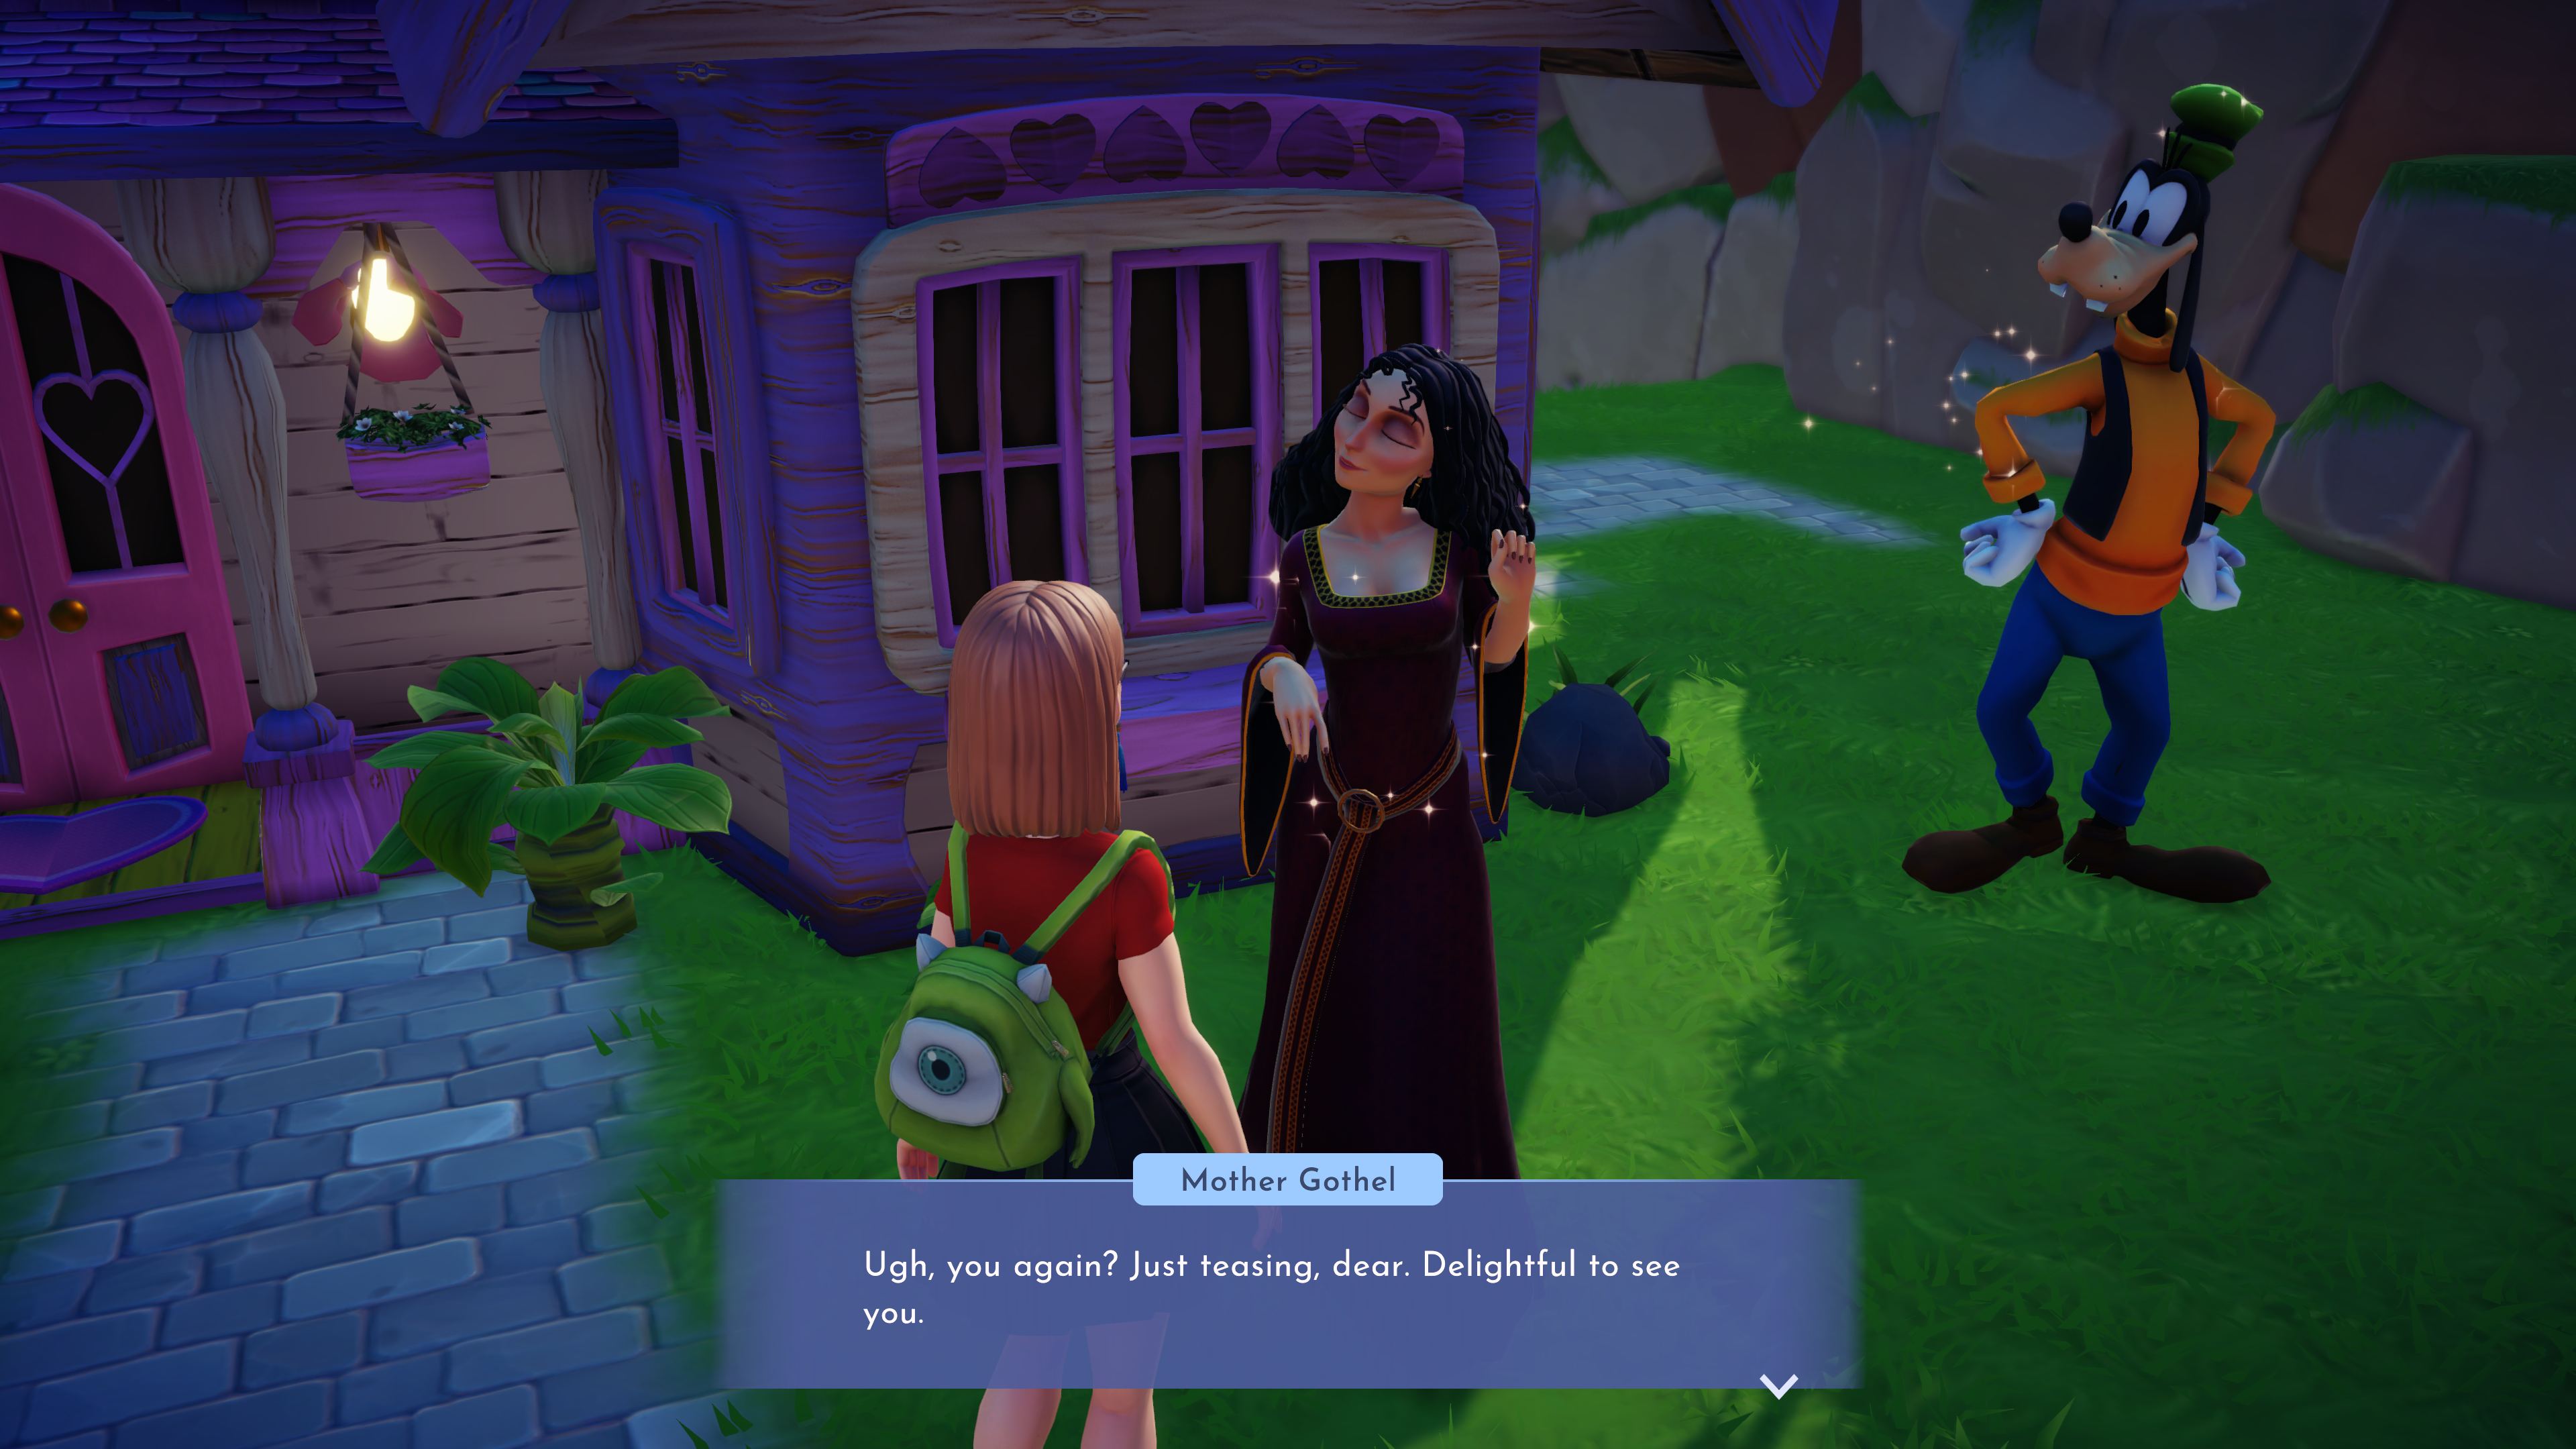 Nicole’s Disney Dreamlight Valley avatar talking to Rapunzel’s mother Gothel, with Goofy looking on.